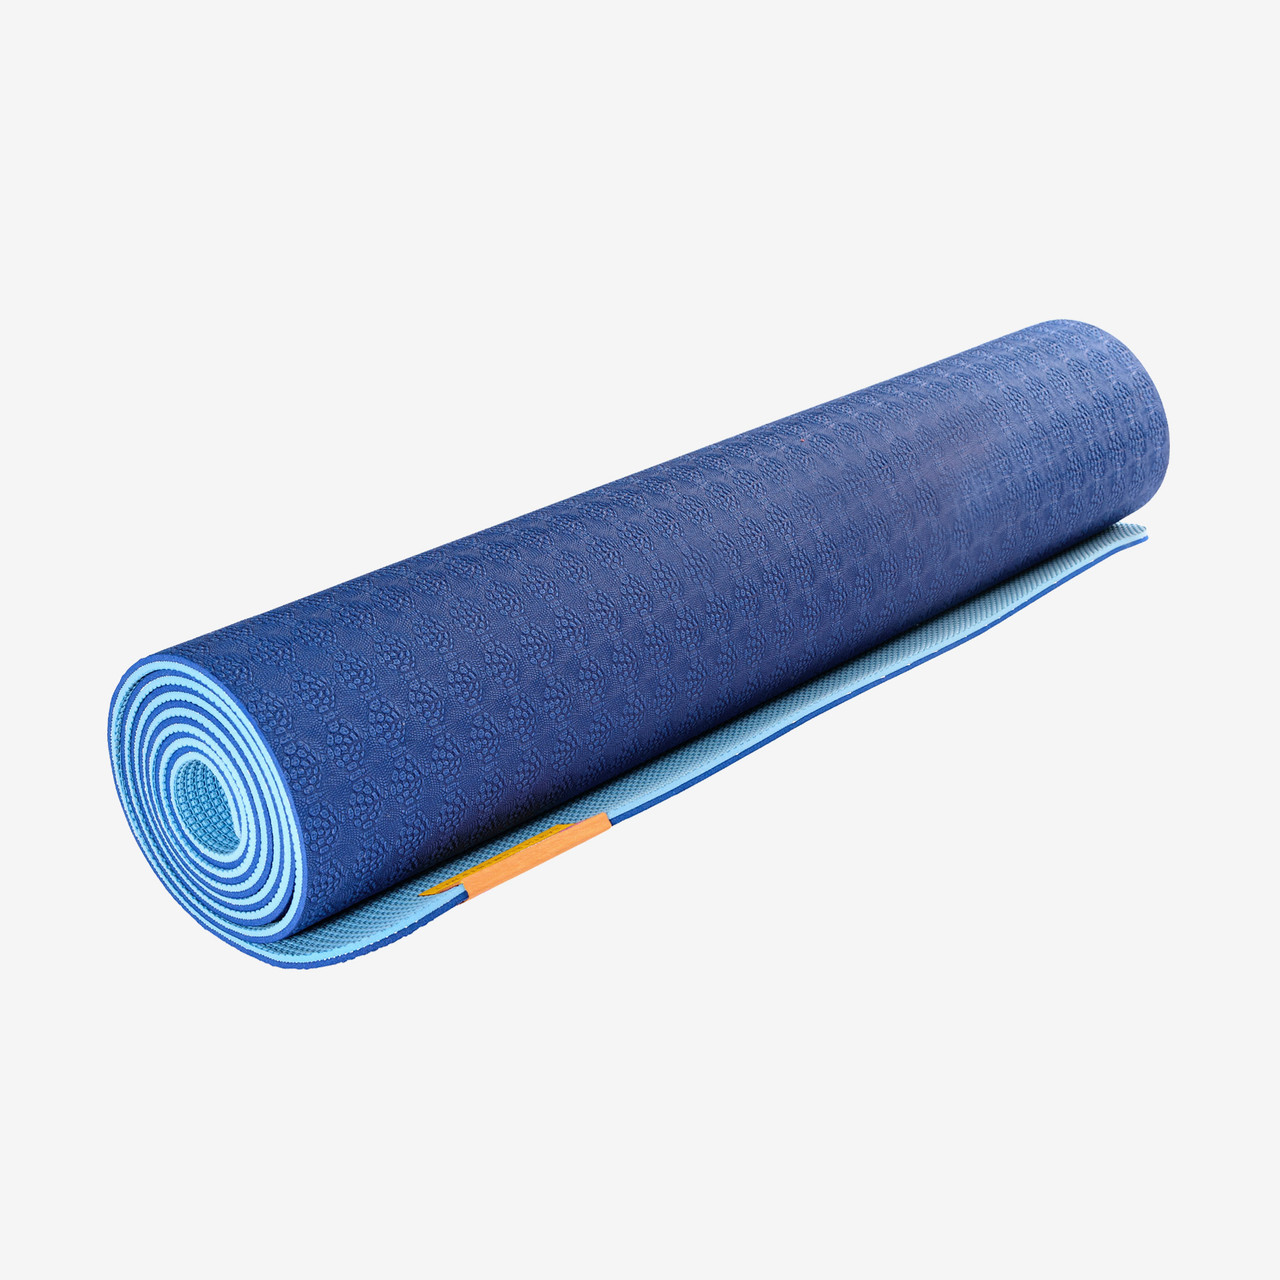 Shop Yoga Mats  They're here! Our new yoga mats are Earth